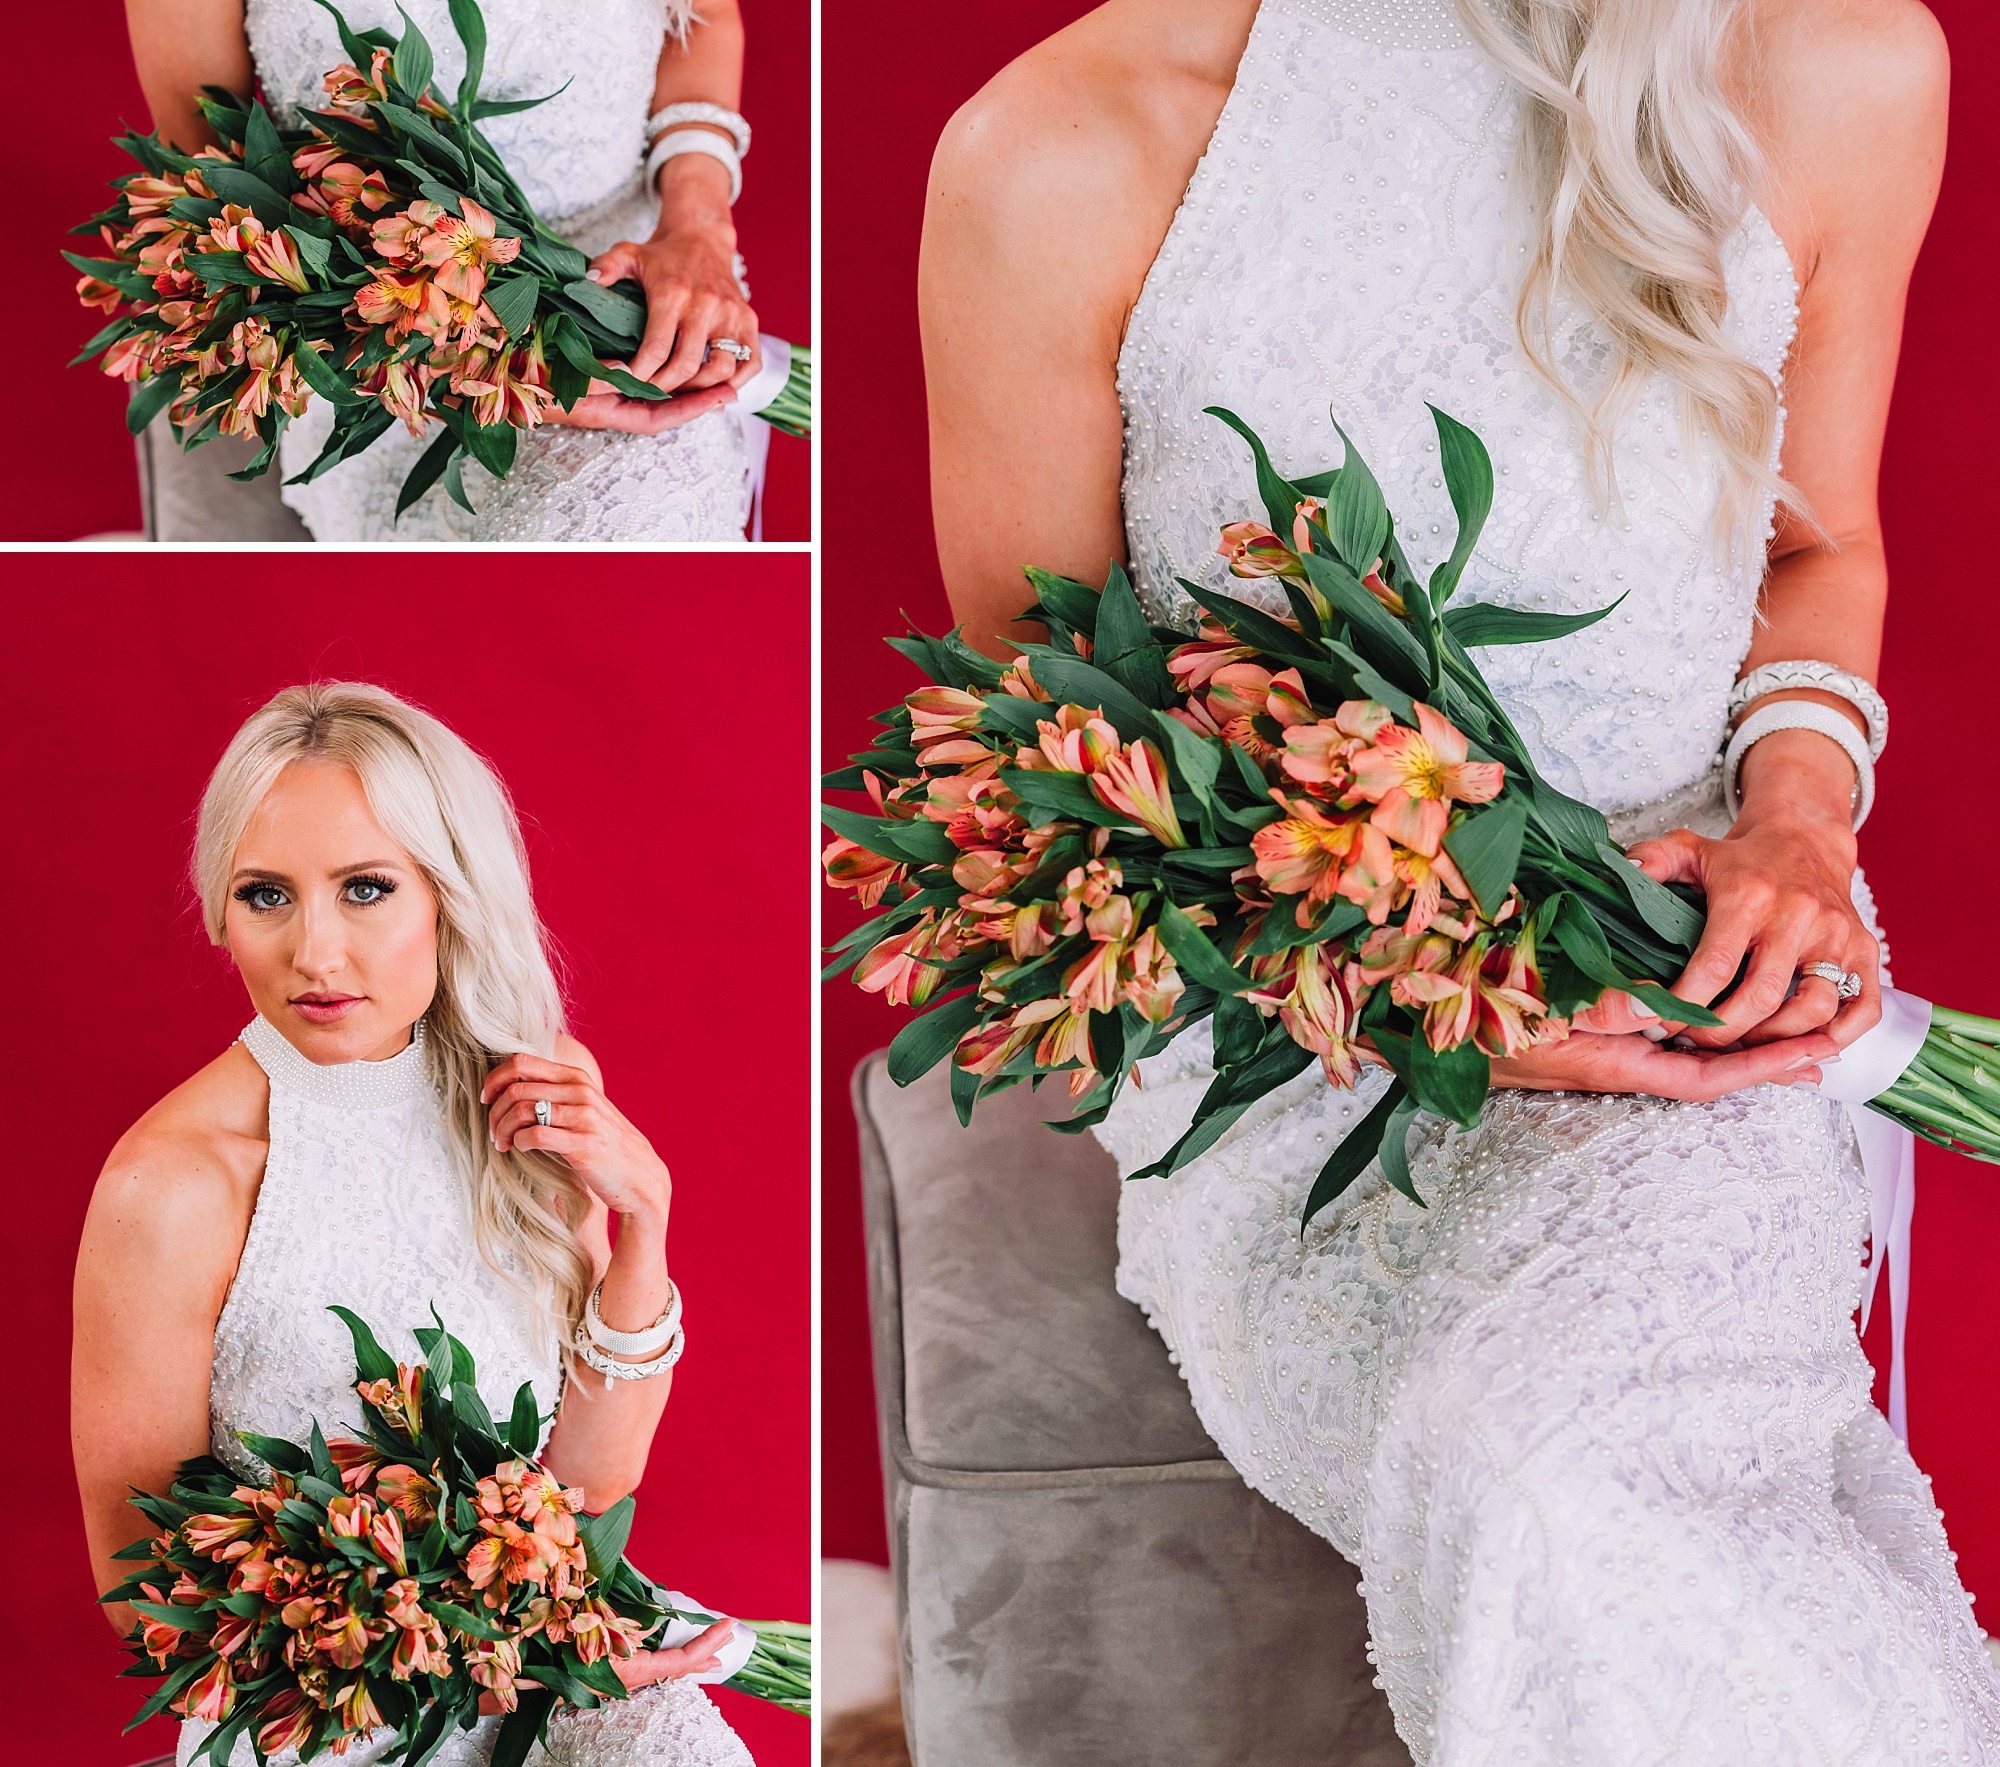 bold-and-colorful-studio-bridal-portraits-in-rigby-at-the-venue-studios-janelle-and-co-wedding-photography-details-dress-bouquets